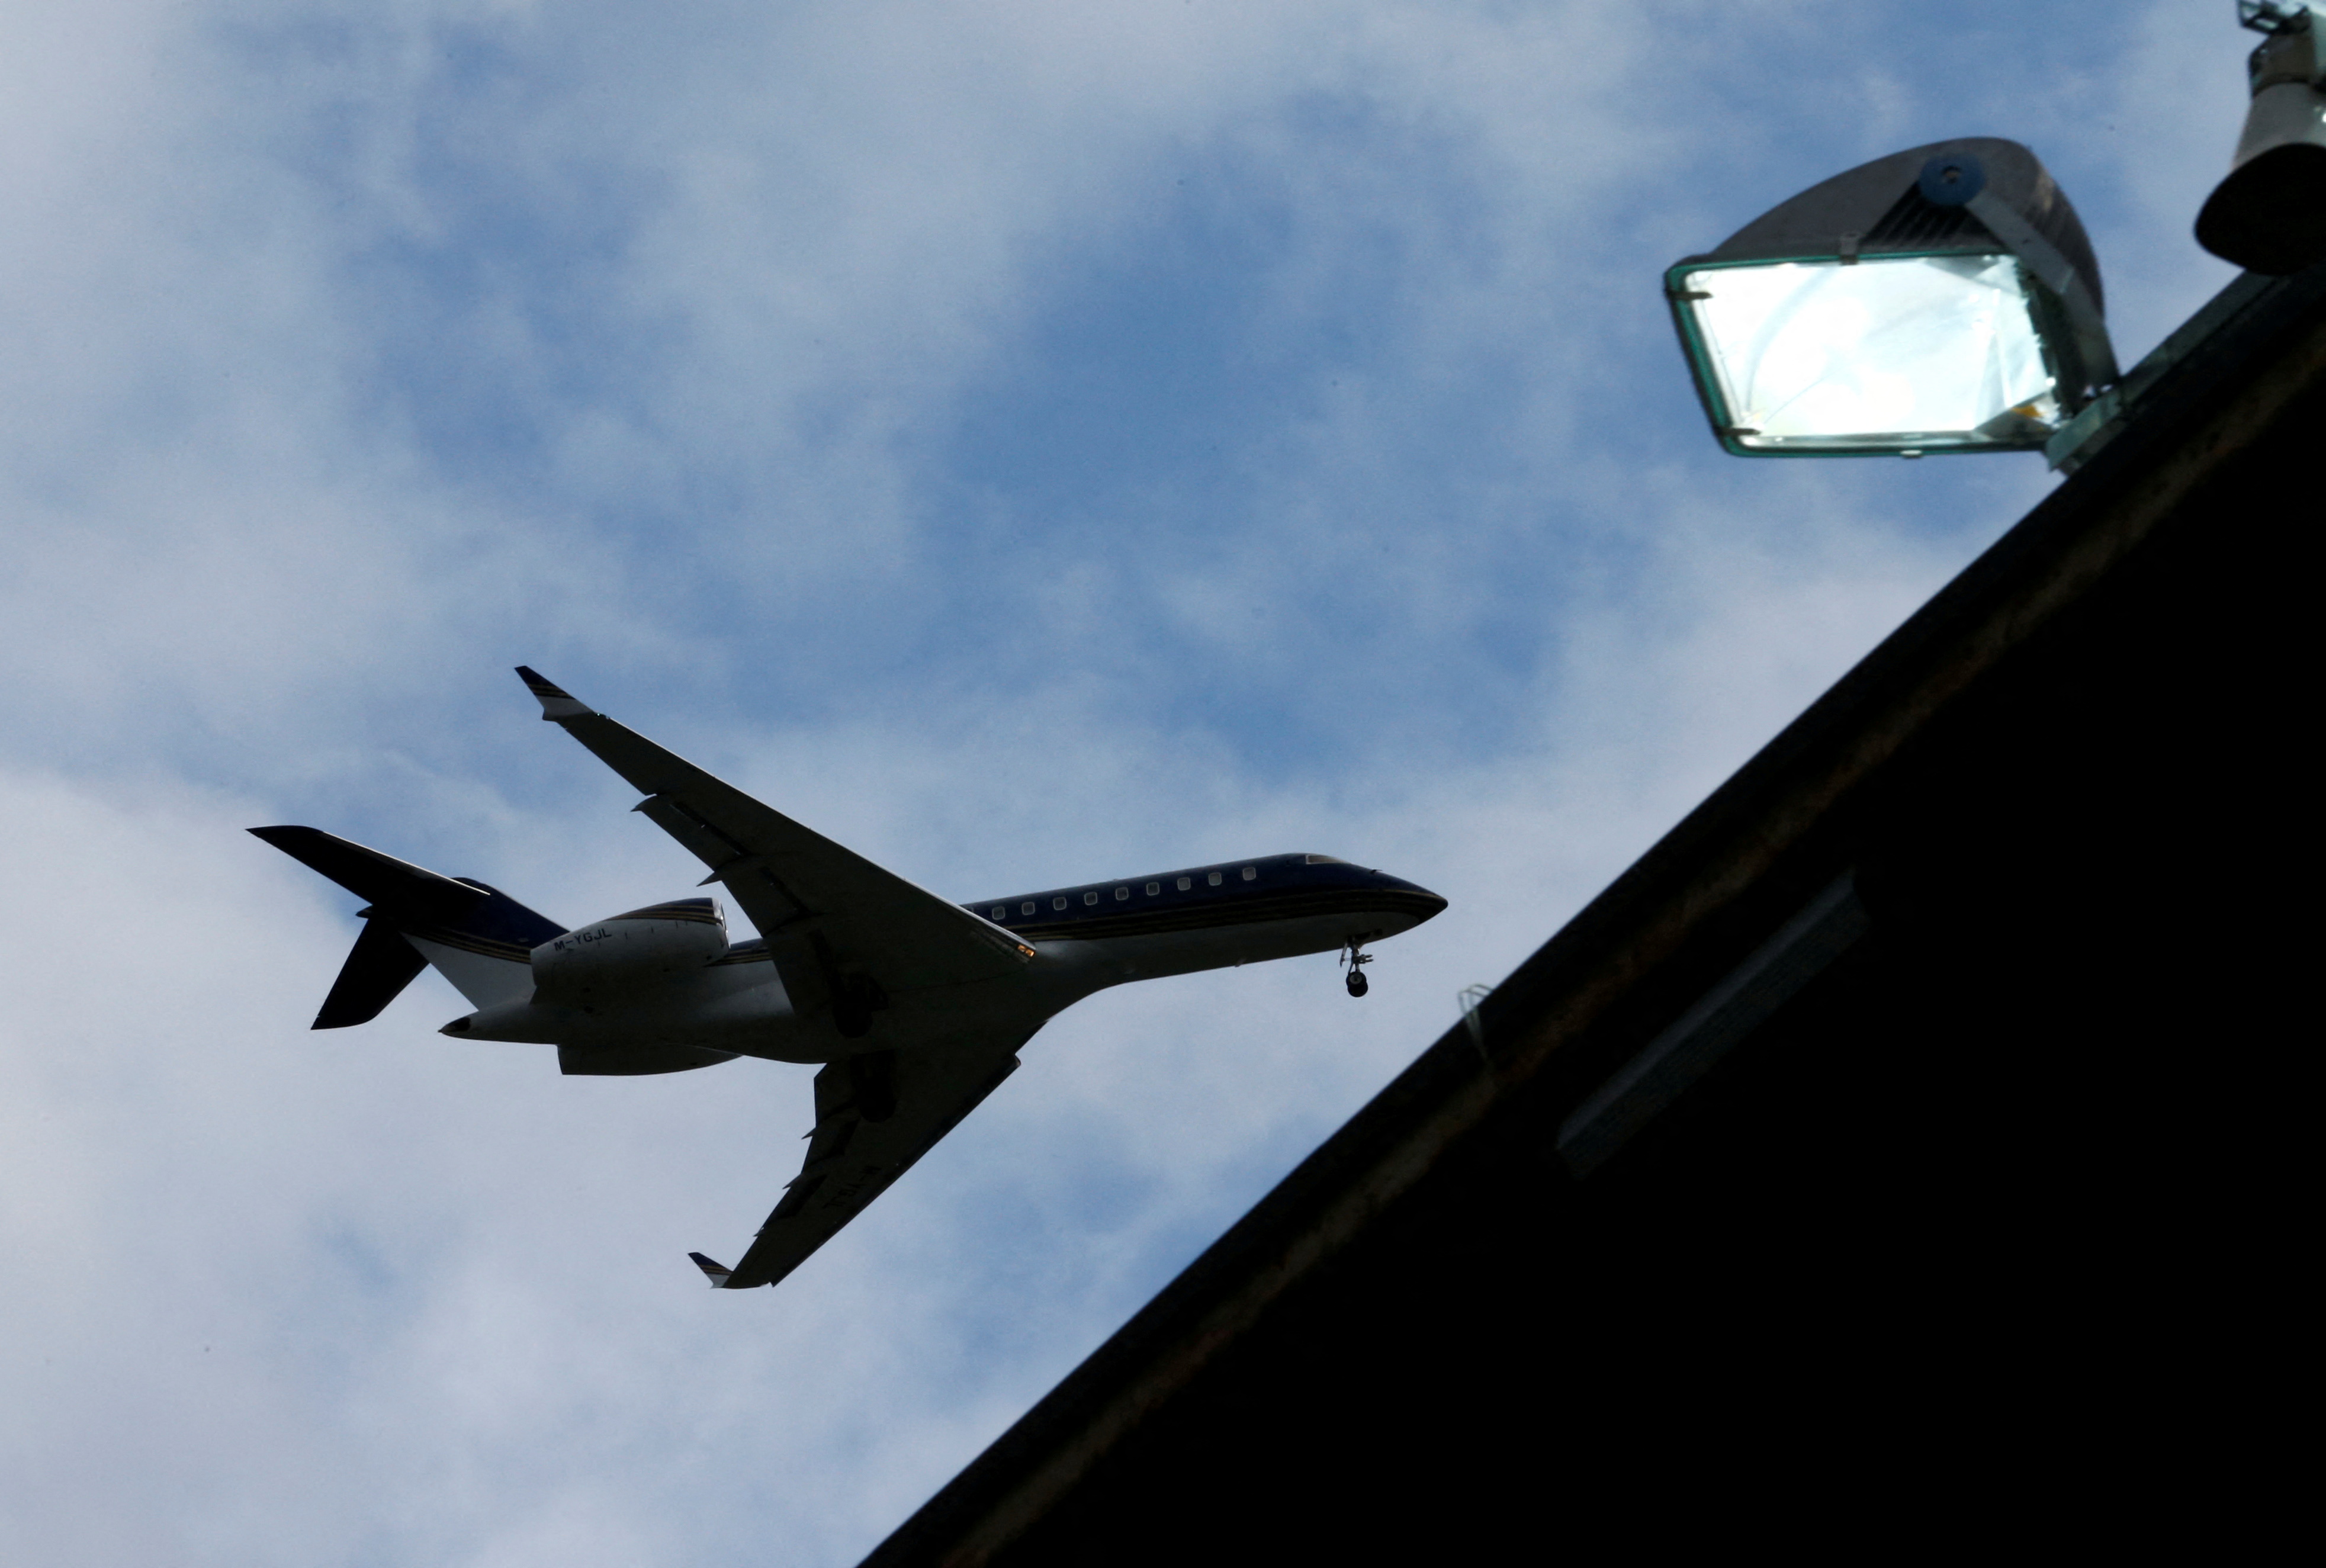 A Bombardier BD-700 aircraft is pictured above football stadium lights at Sion Airport